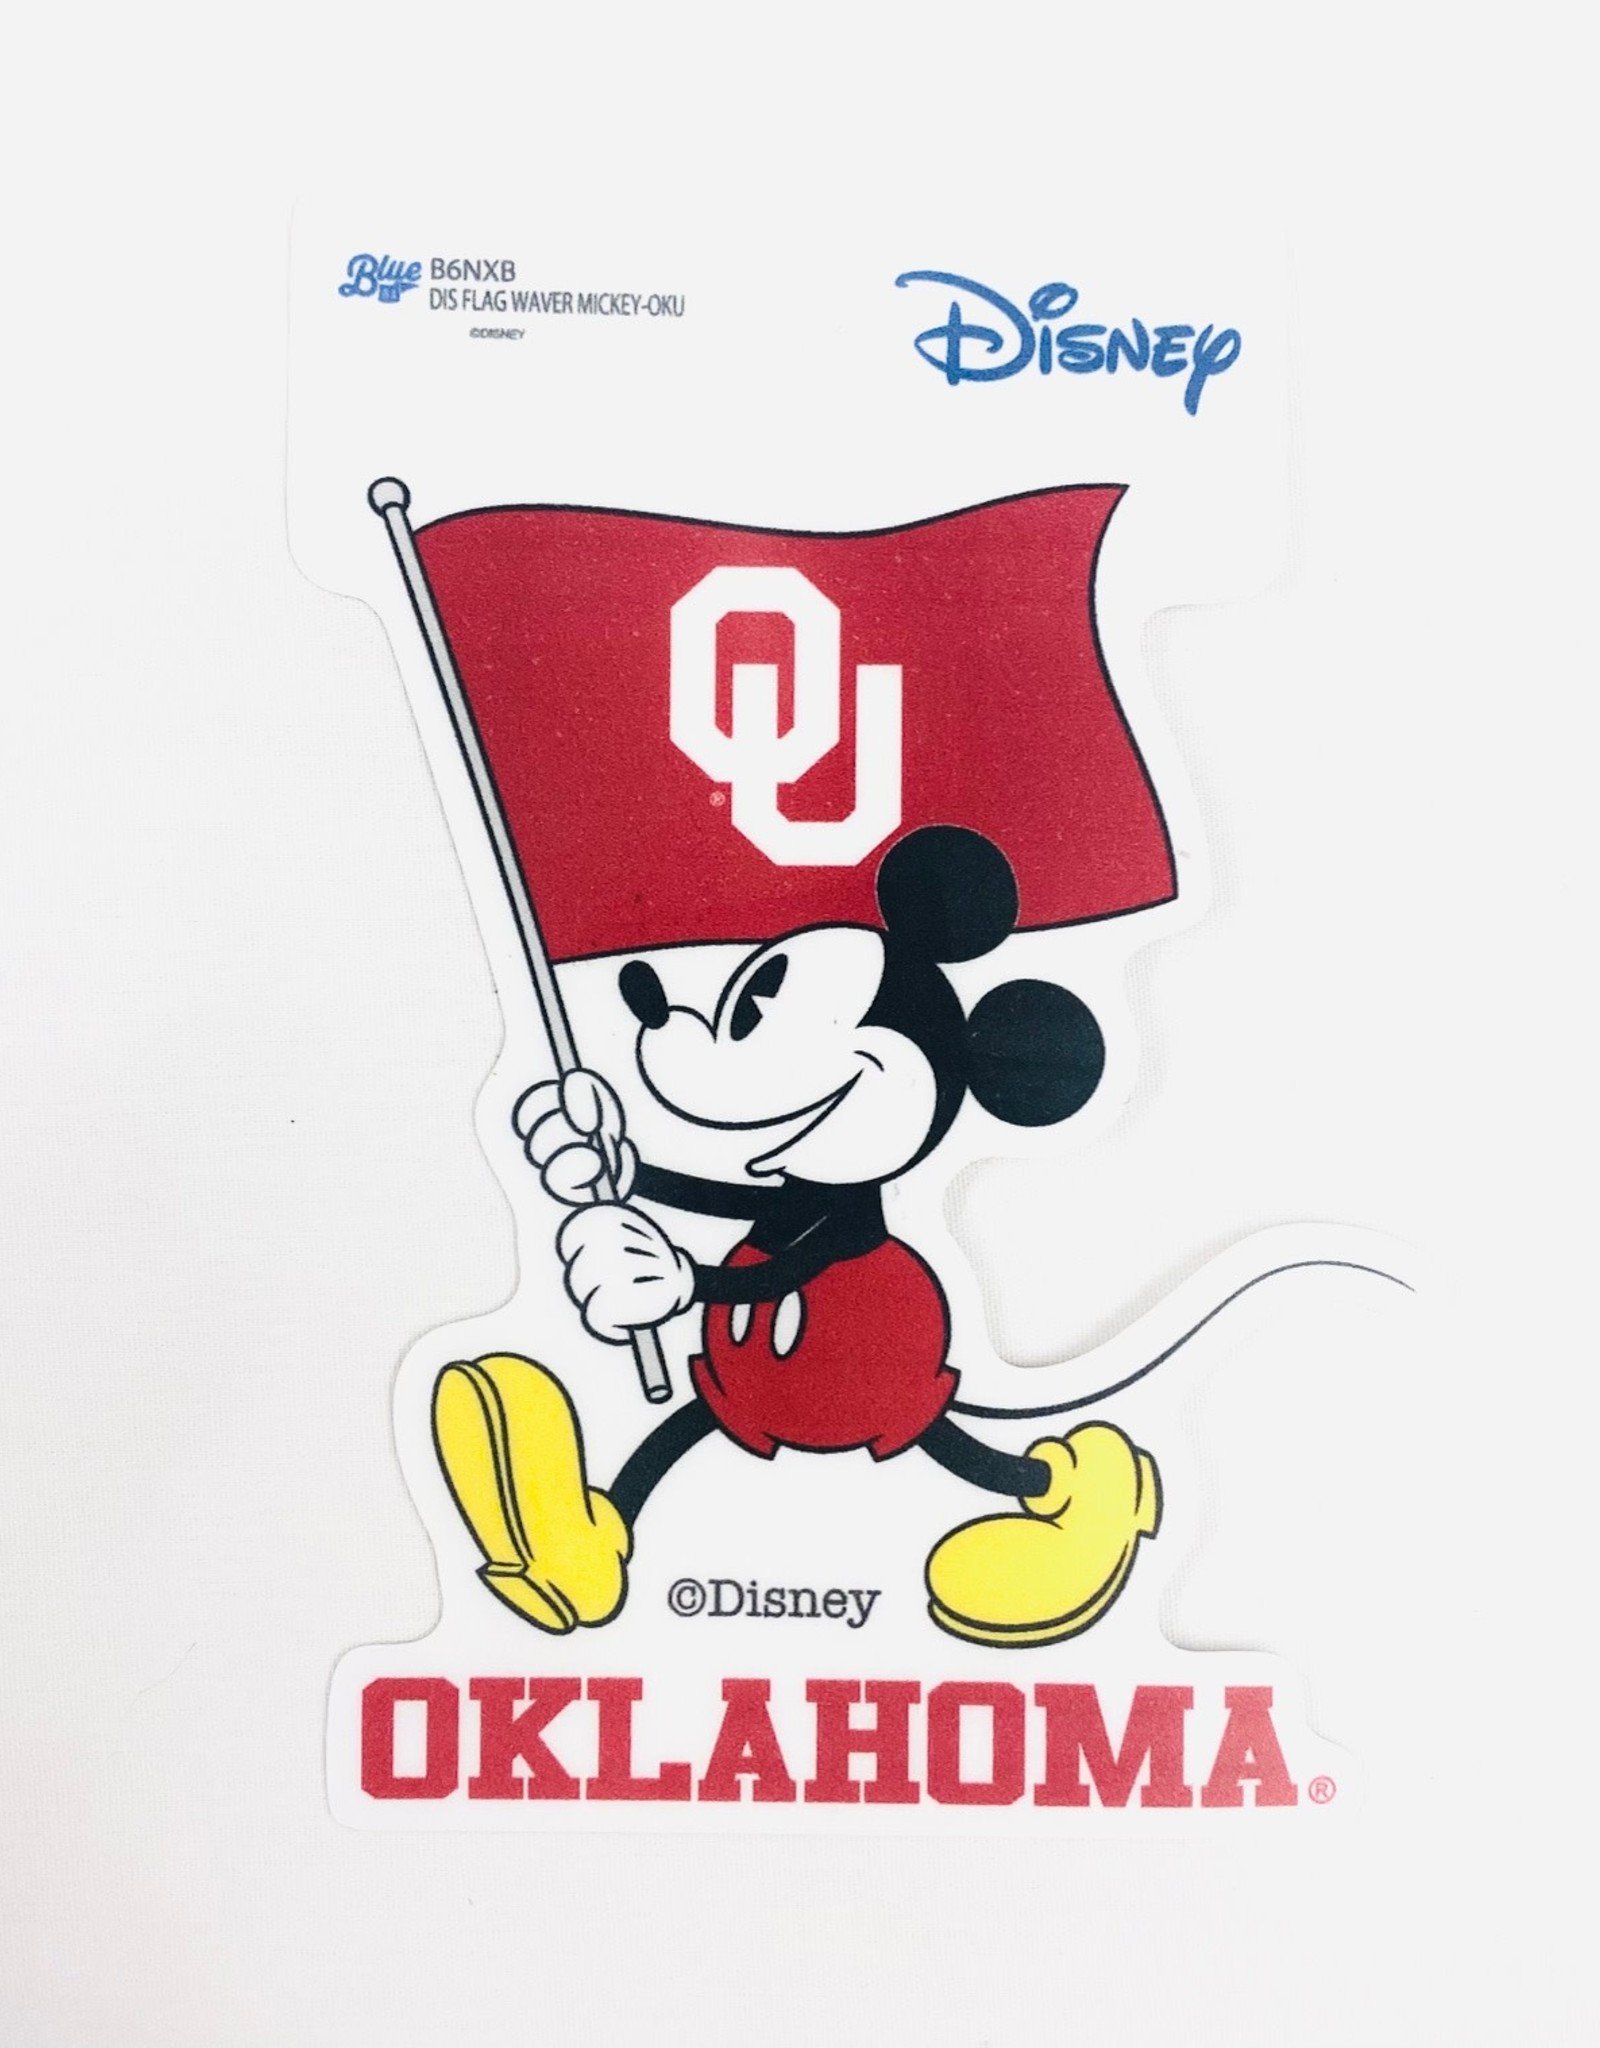 Blue 84 Mickey Mouse Flag Waiver Sticker - Balfour of Norman